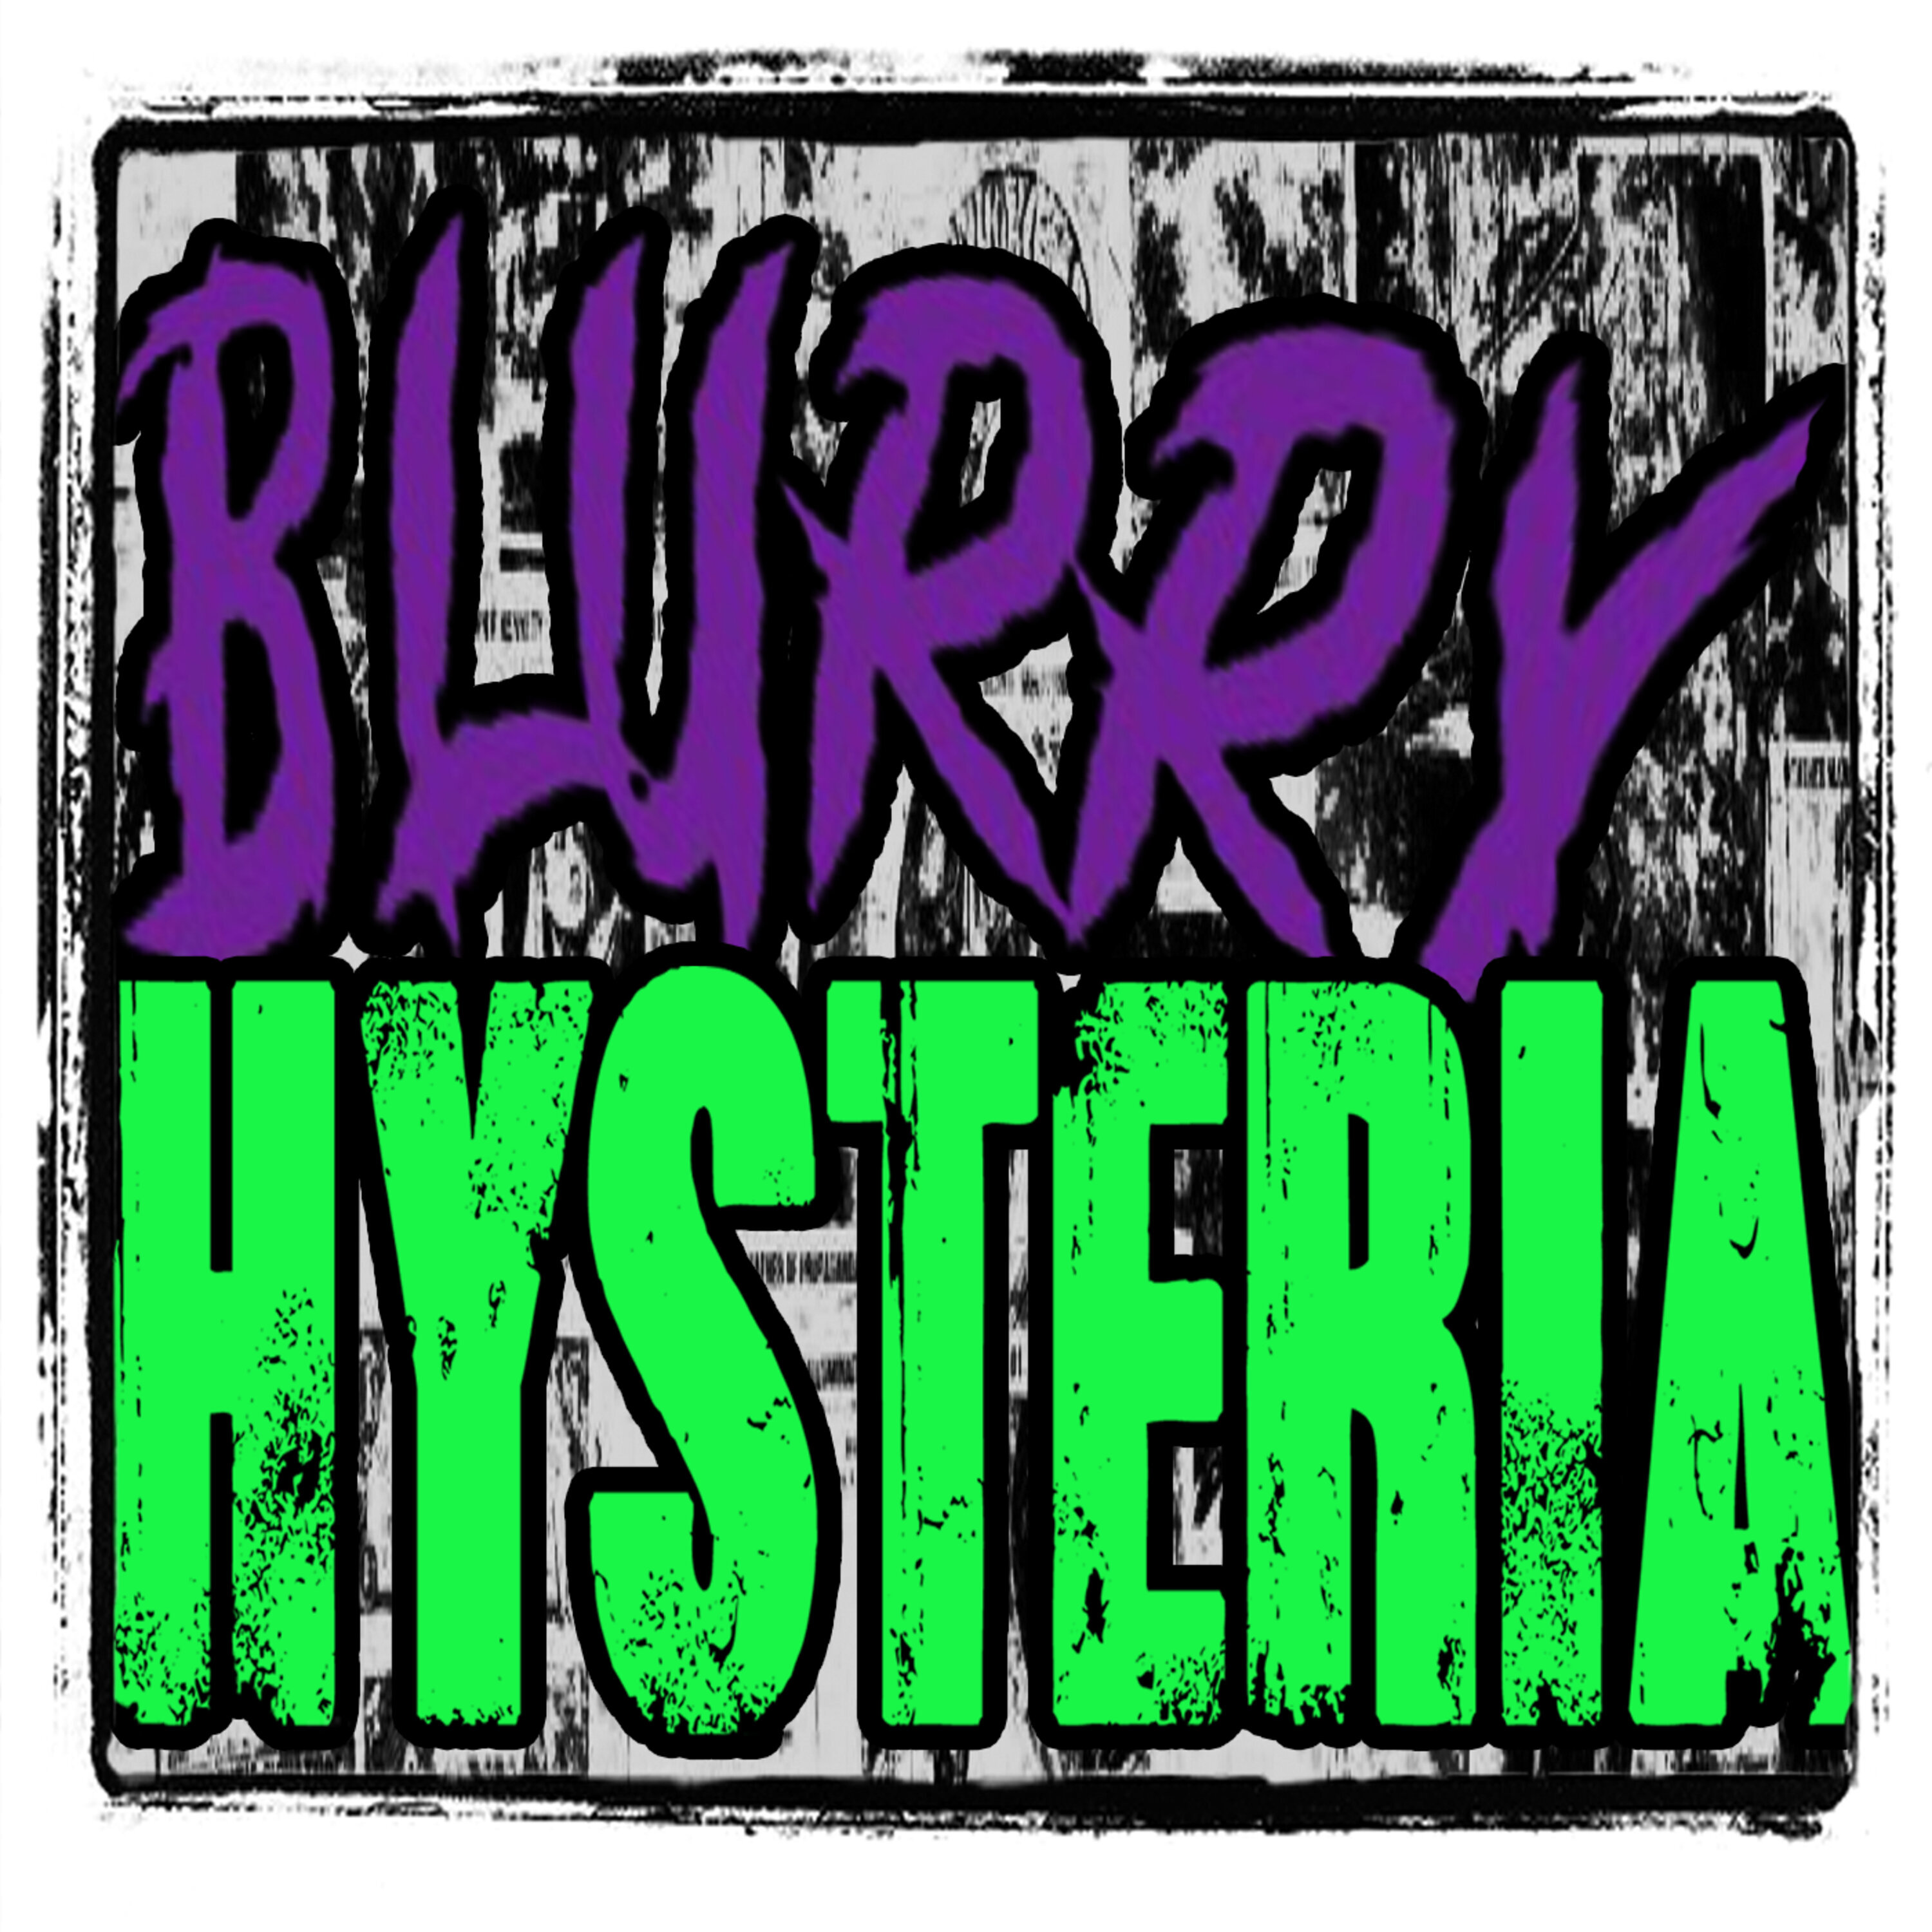 Blurry Hysteria 7: Snippy Vampires Image